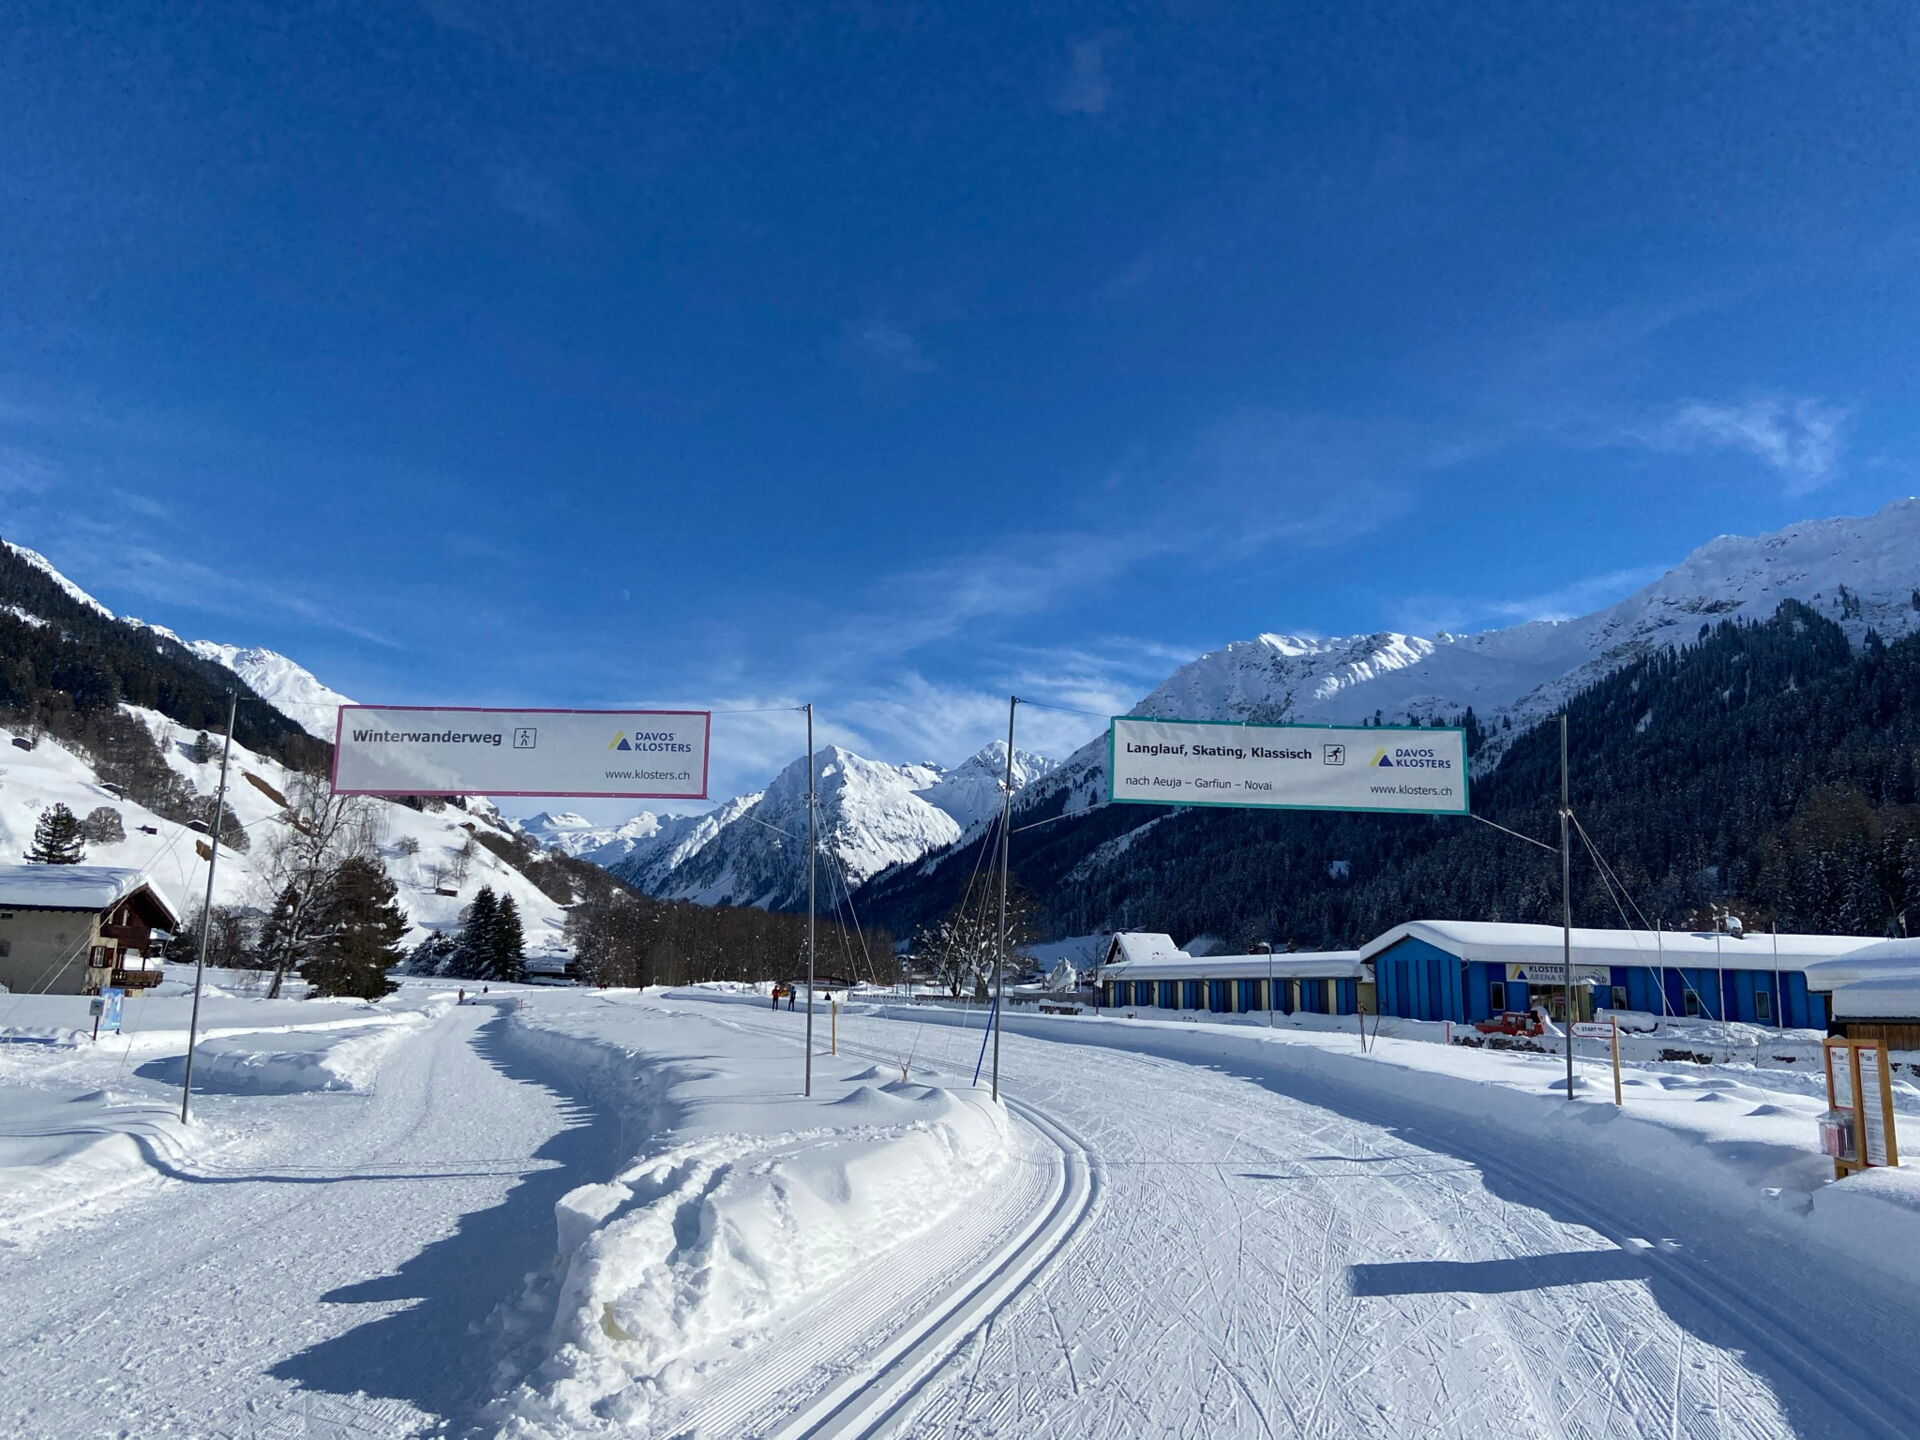 Klosters sports center with cross-country ski trail, children's paradise and ice rink